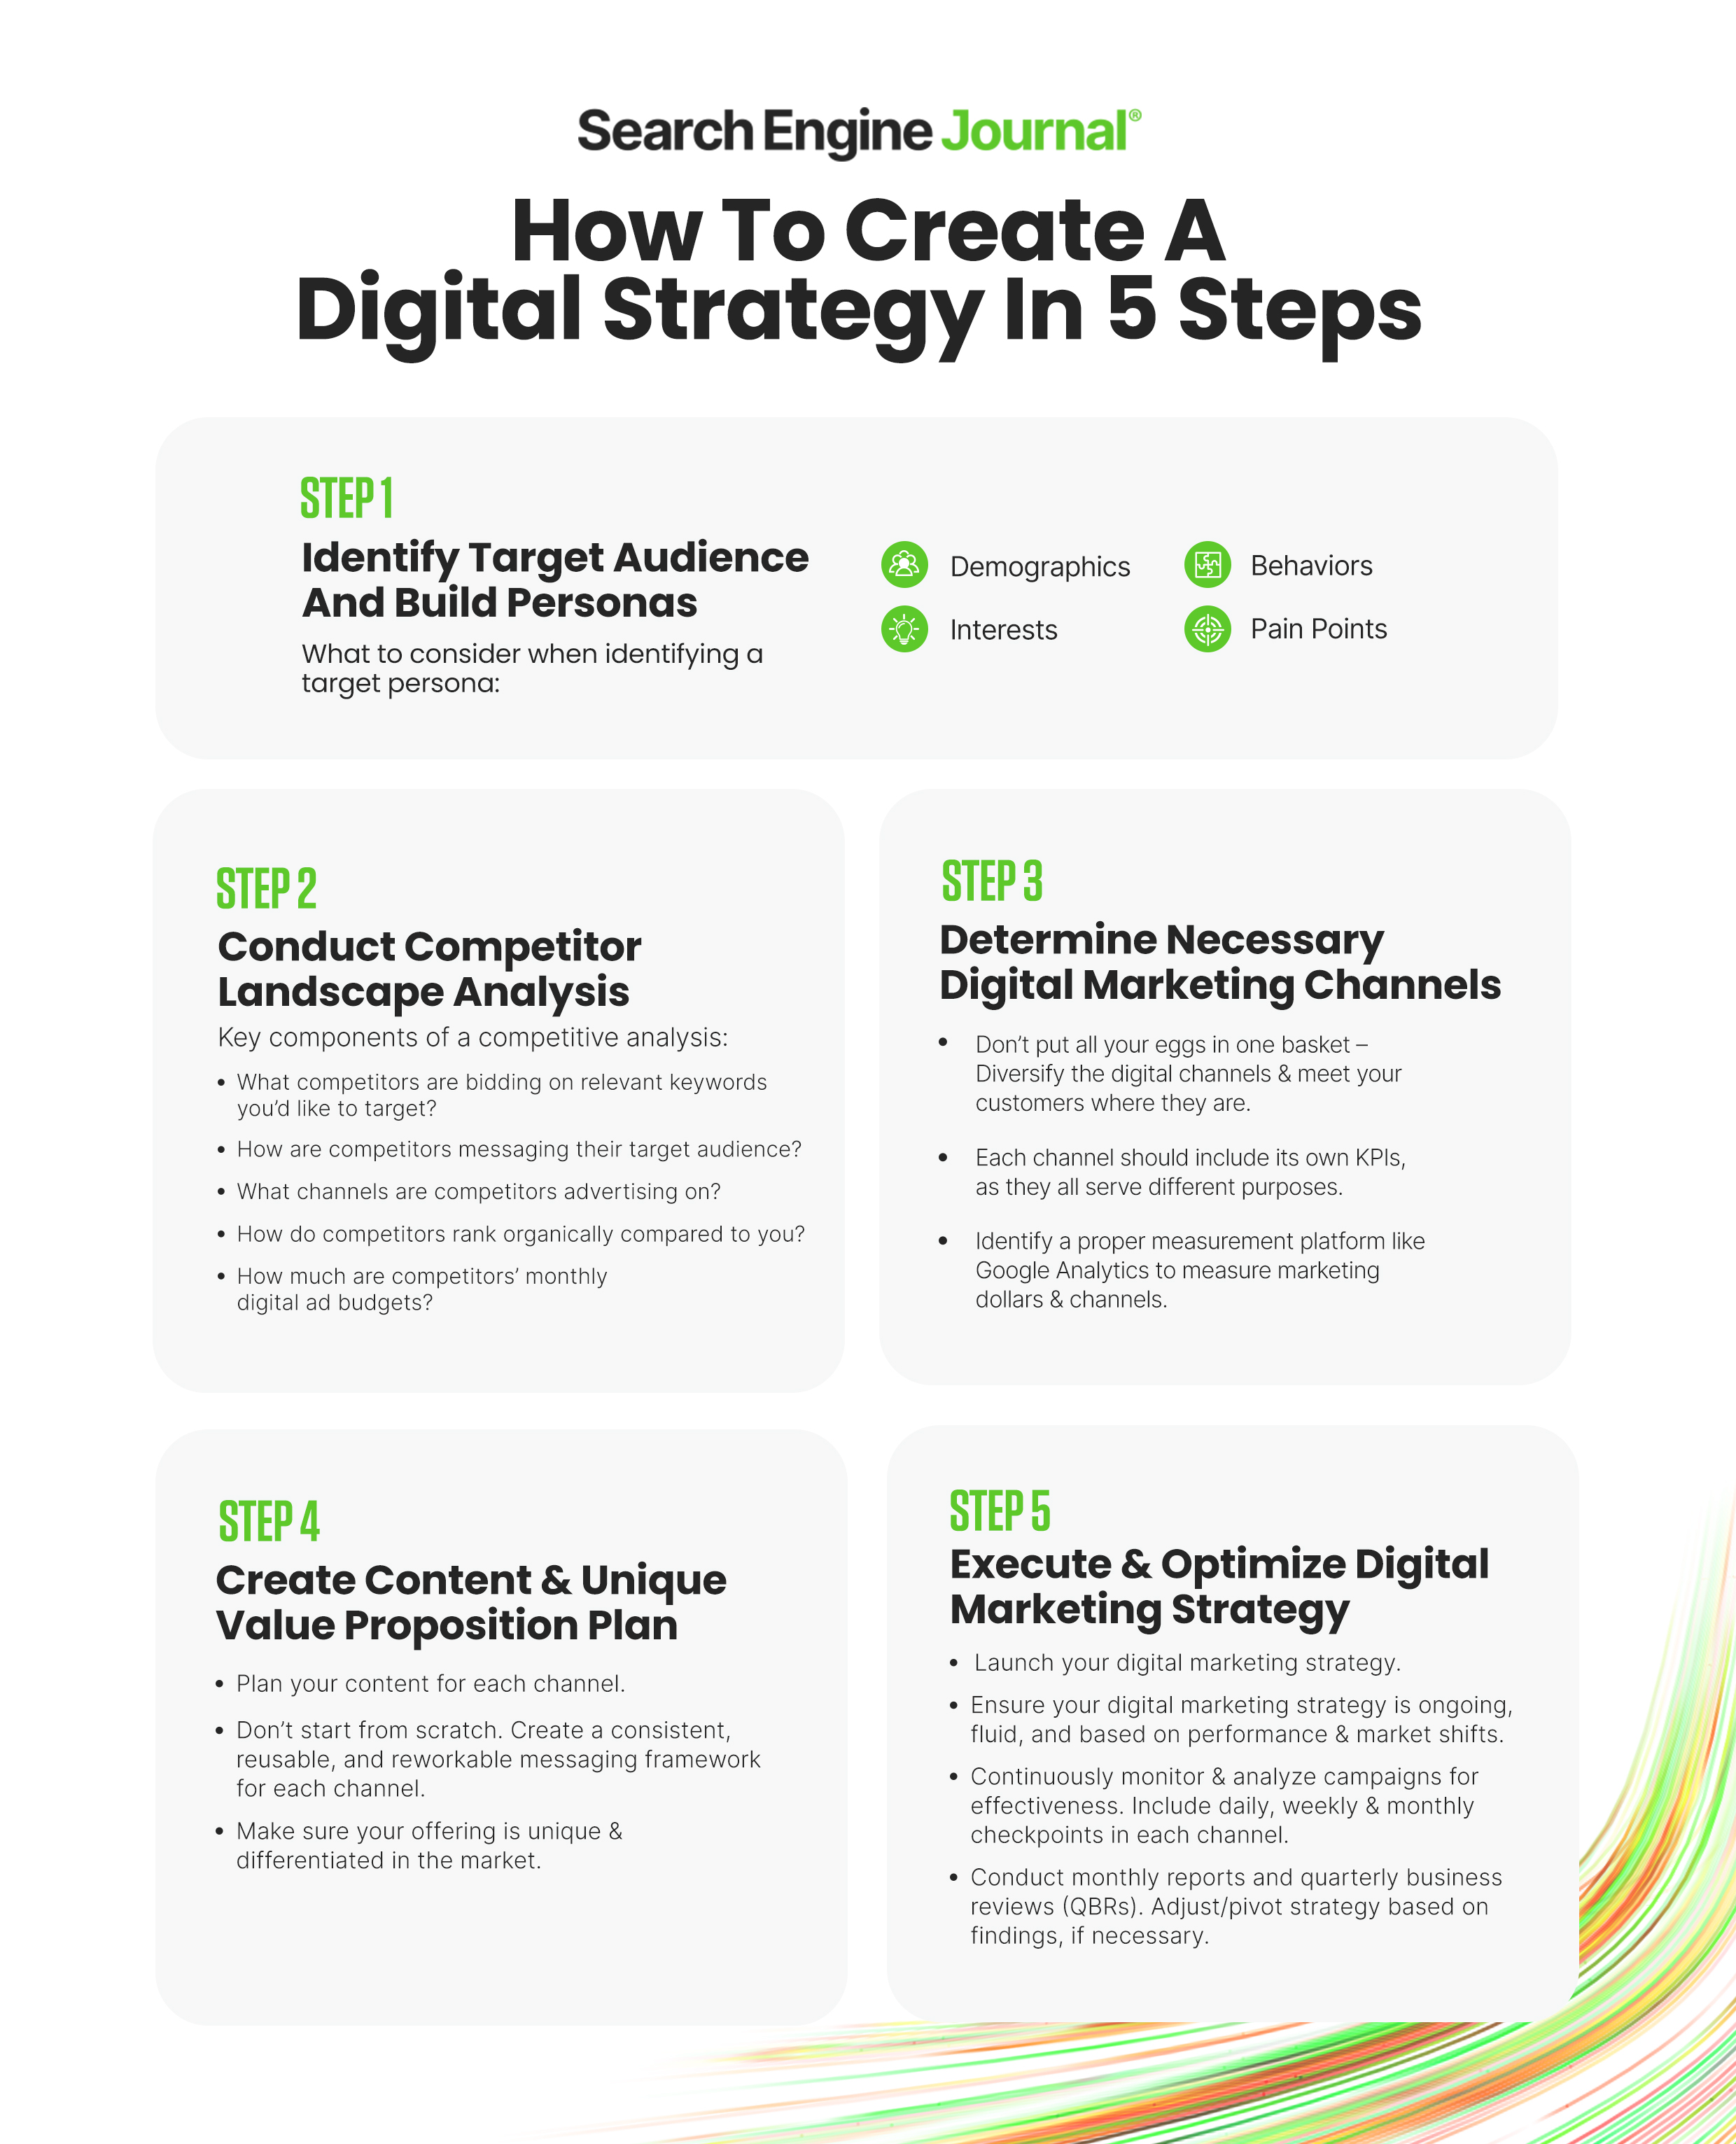 How to build a digital marketing strategy